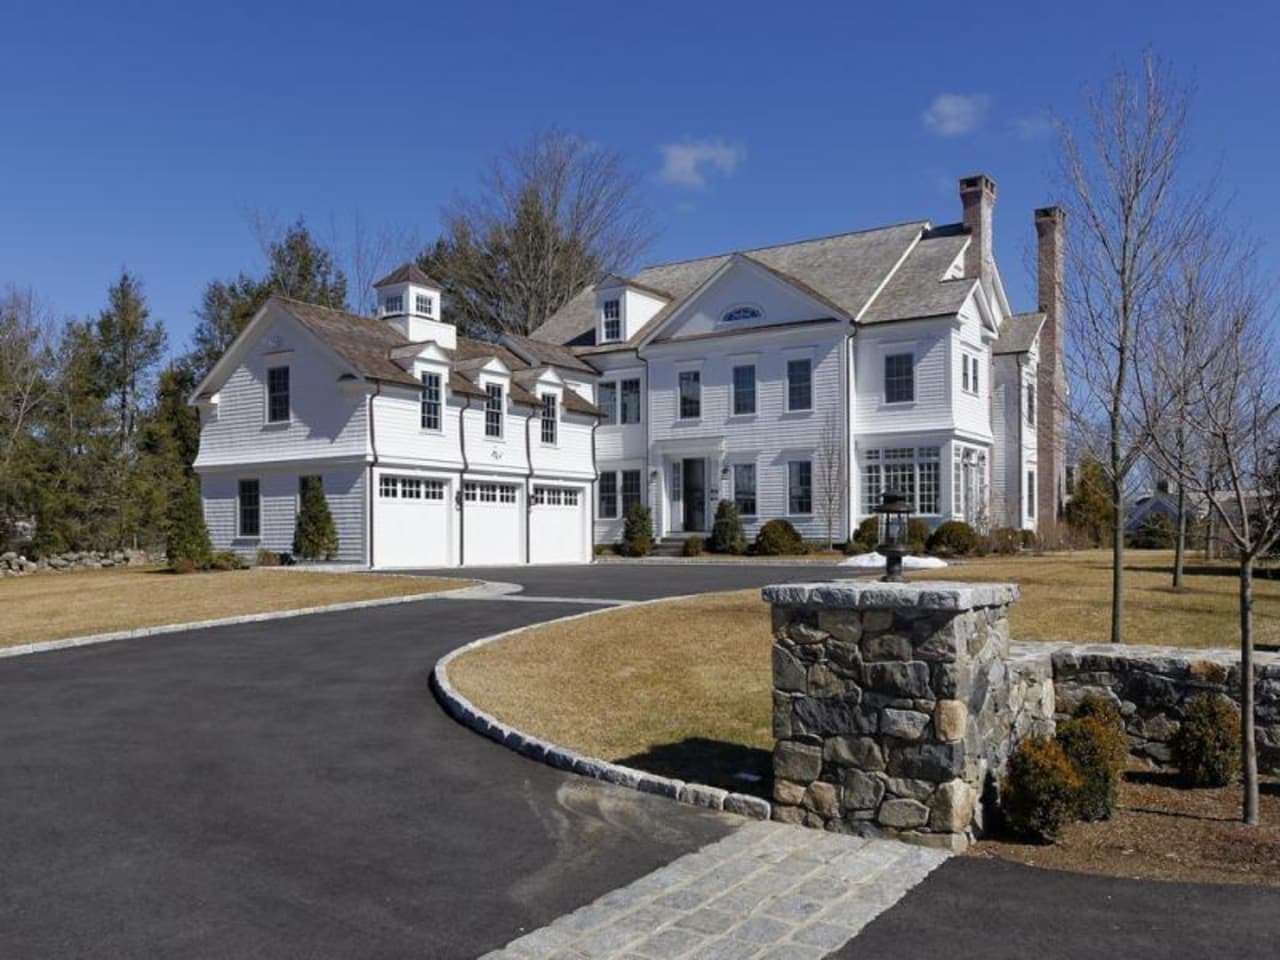 The home at 1129 Oenoke Ridge in New Canaan will be open on Sunday from 1 to 3 p.m. 